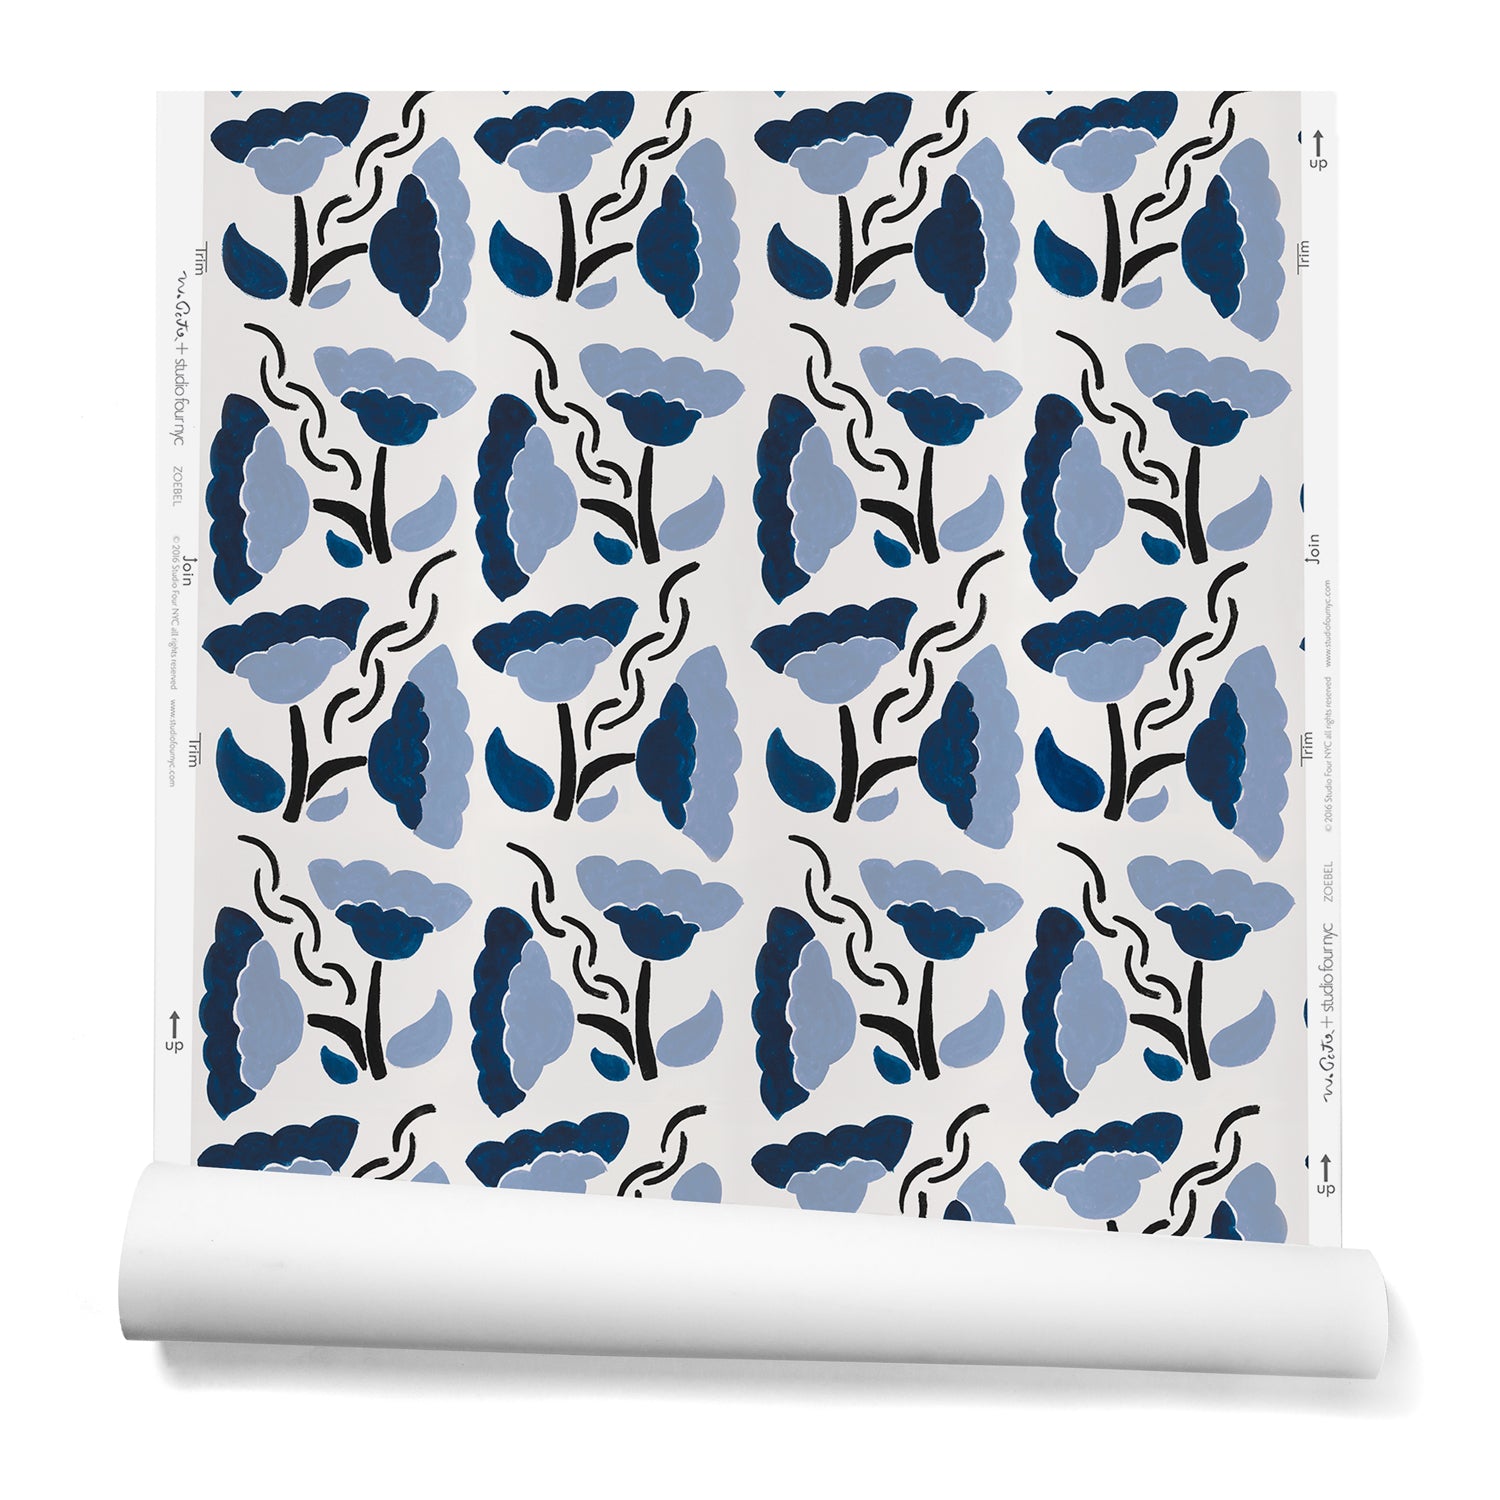 A hanging roll of wallpaper with a repeating pattern of large-scale graphic flowers in shades of blue on a cream background.